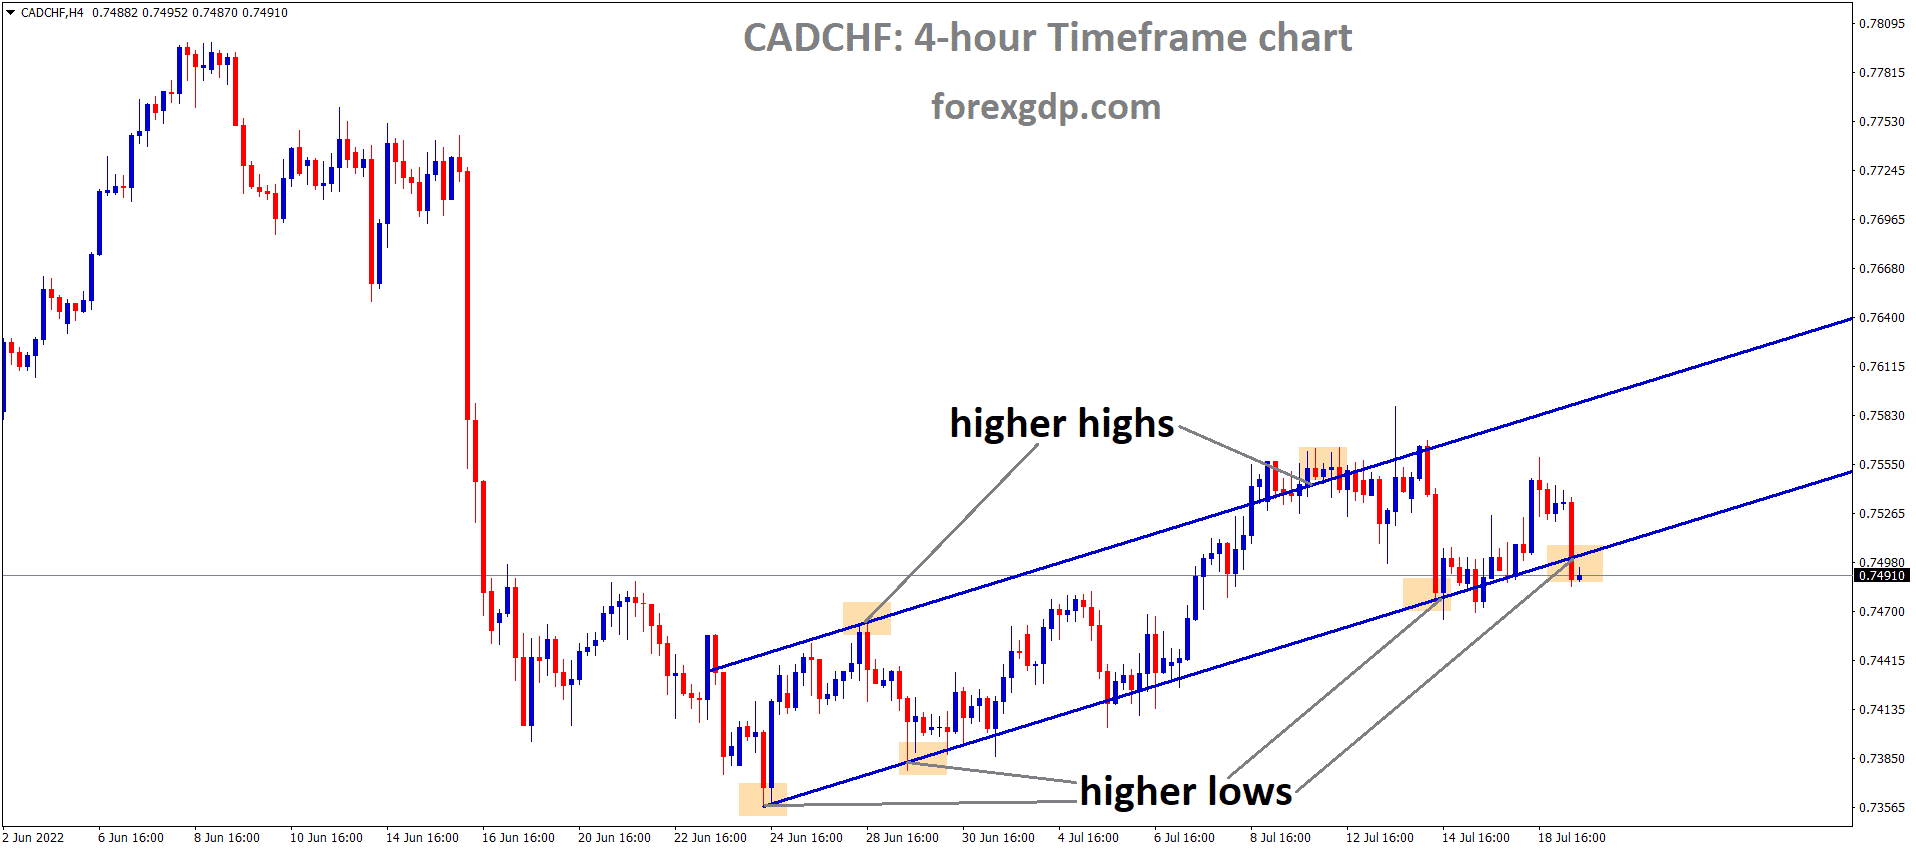 CADCHF is moving in an Ascending channel and the market has reached the higher low area of the channel 1